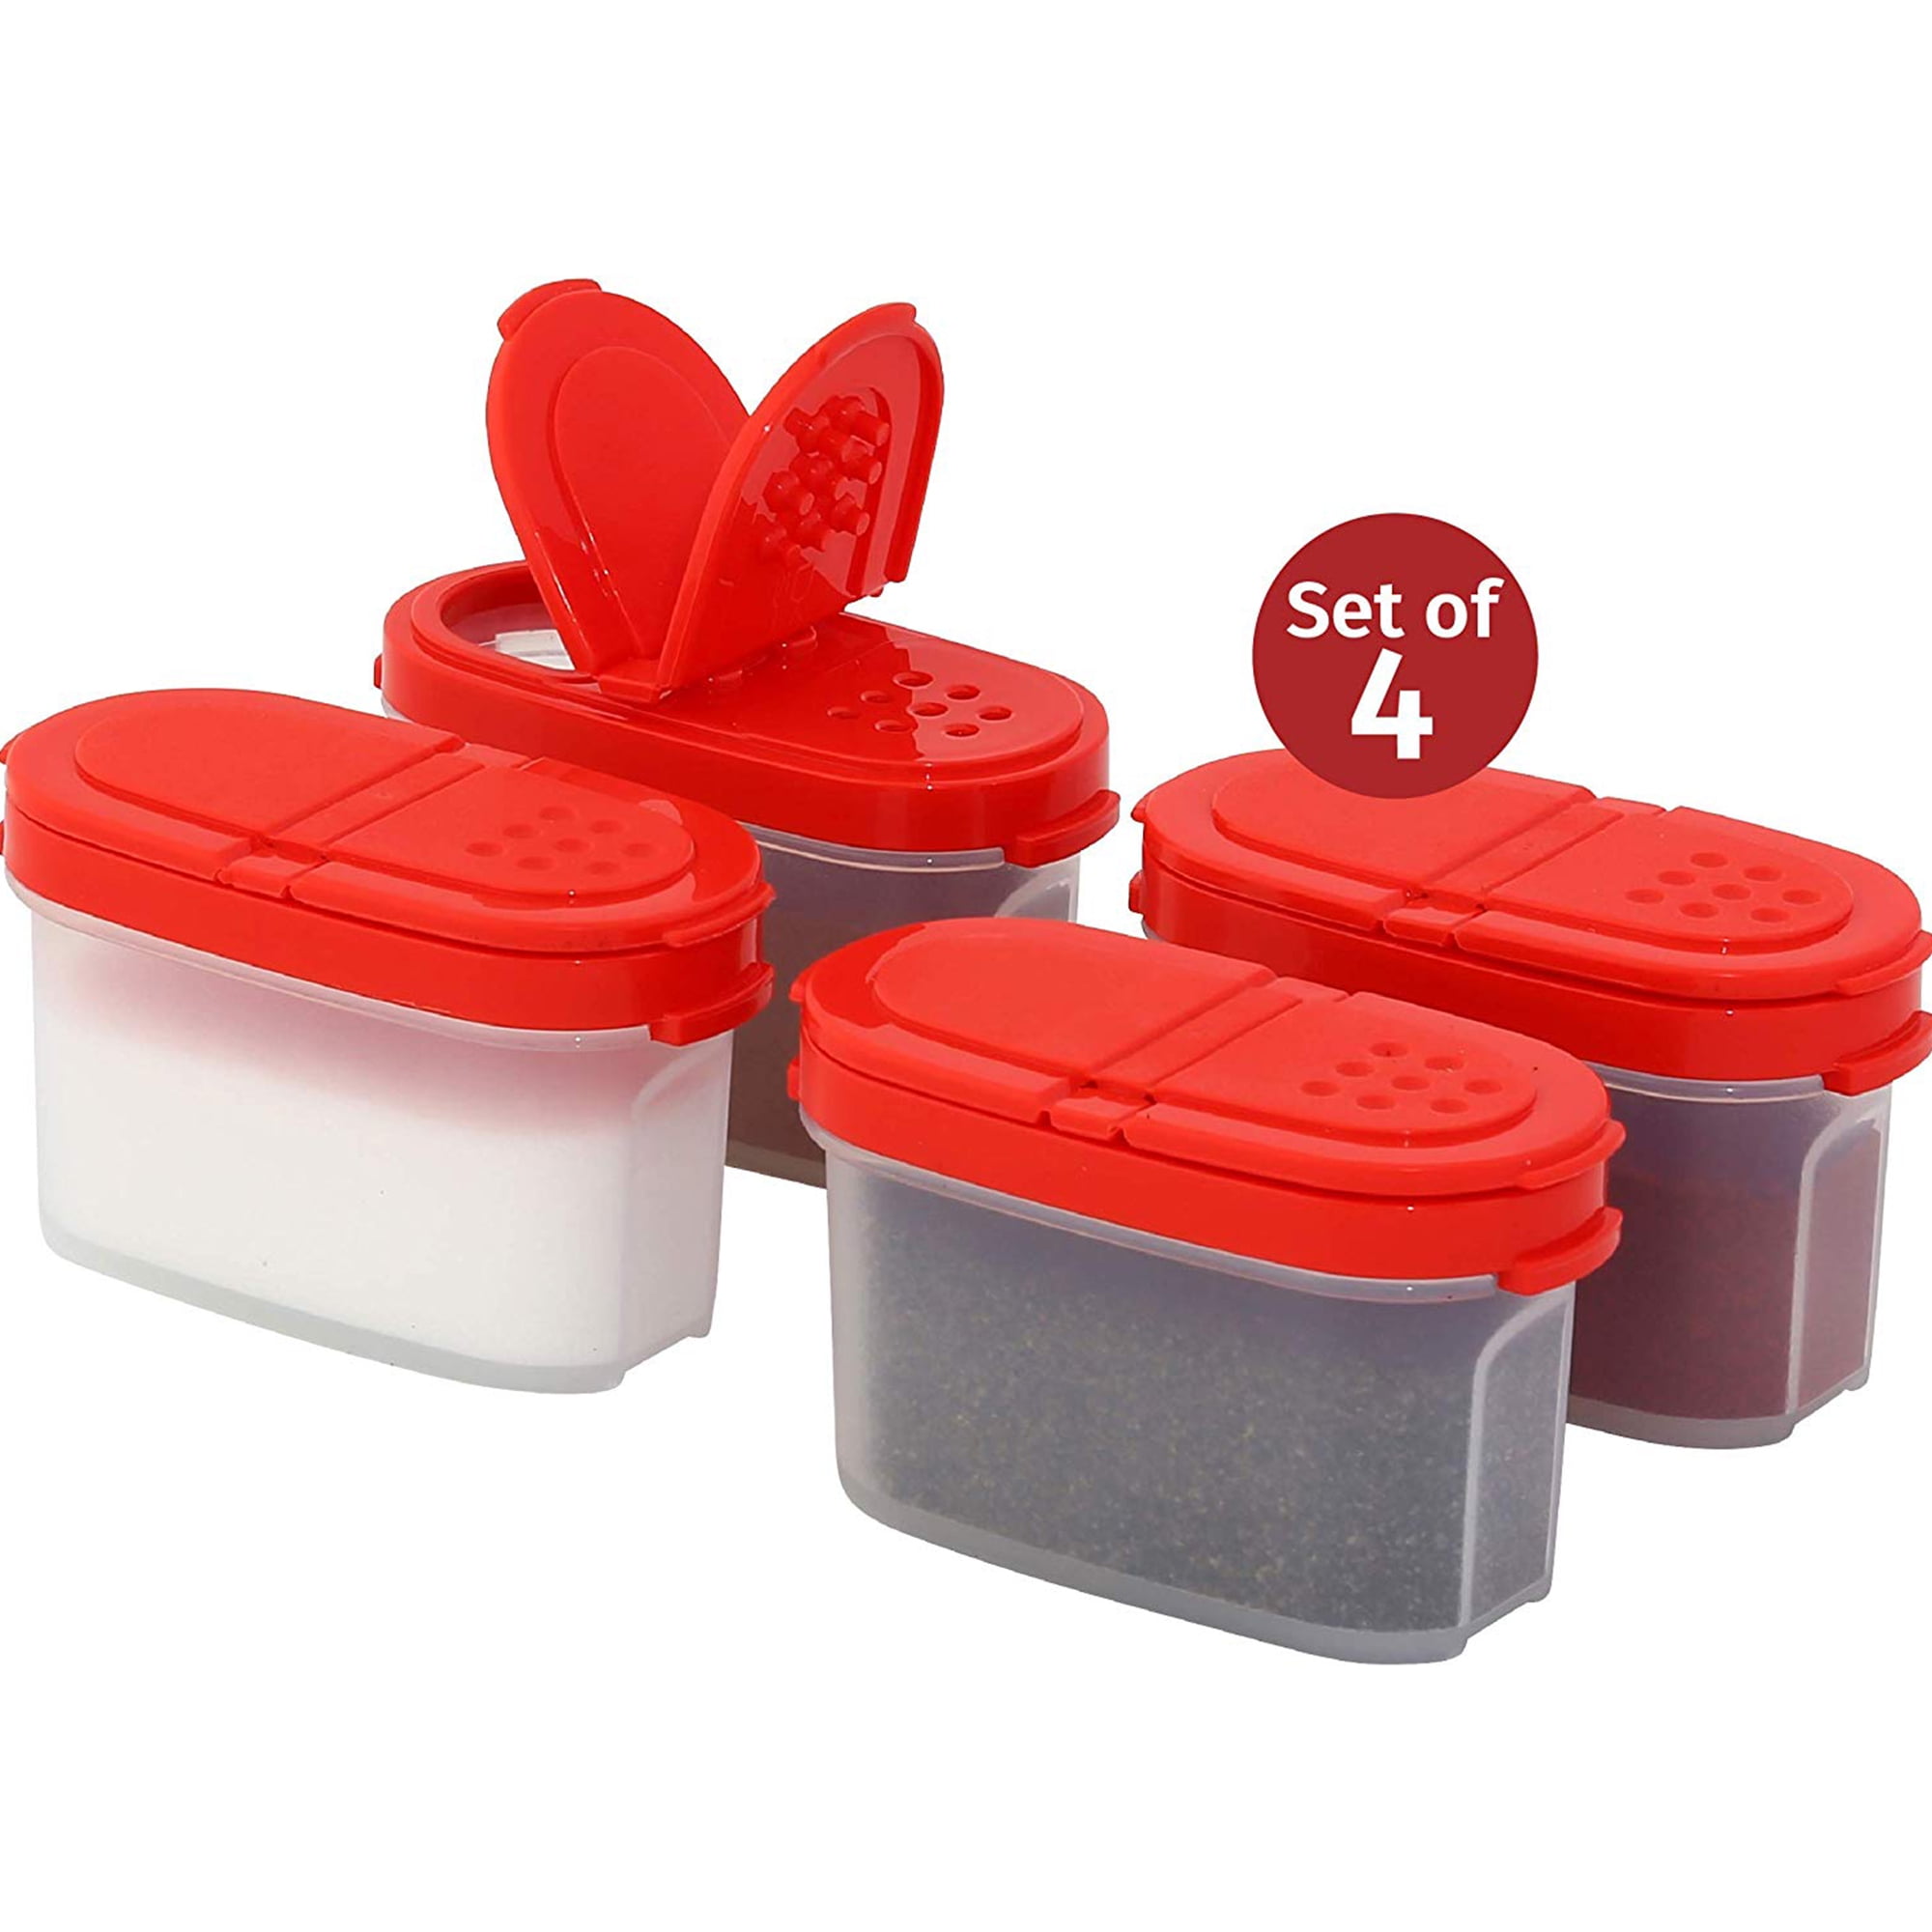  SIGNORA WARE - Food Container Sets / Food Containers: Home &  Kitchen